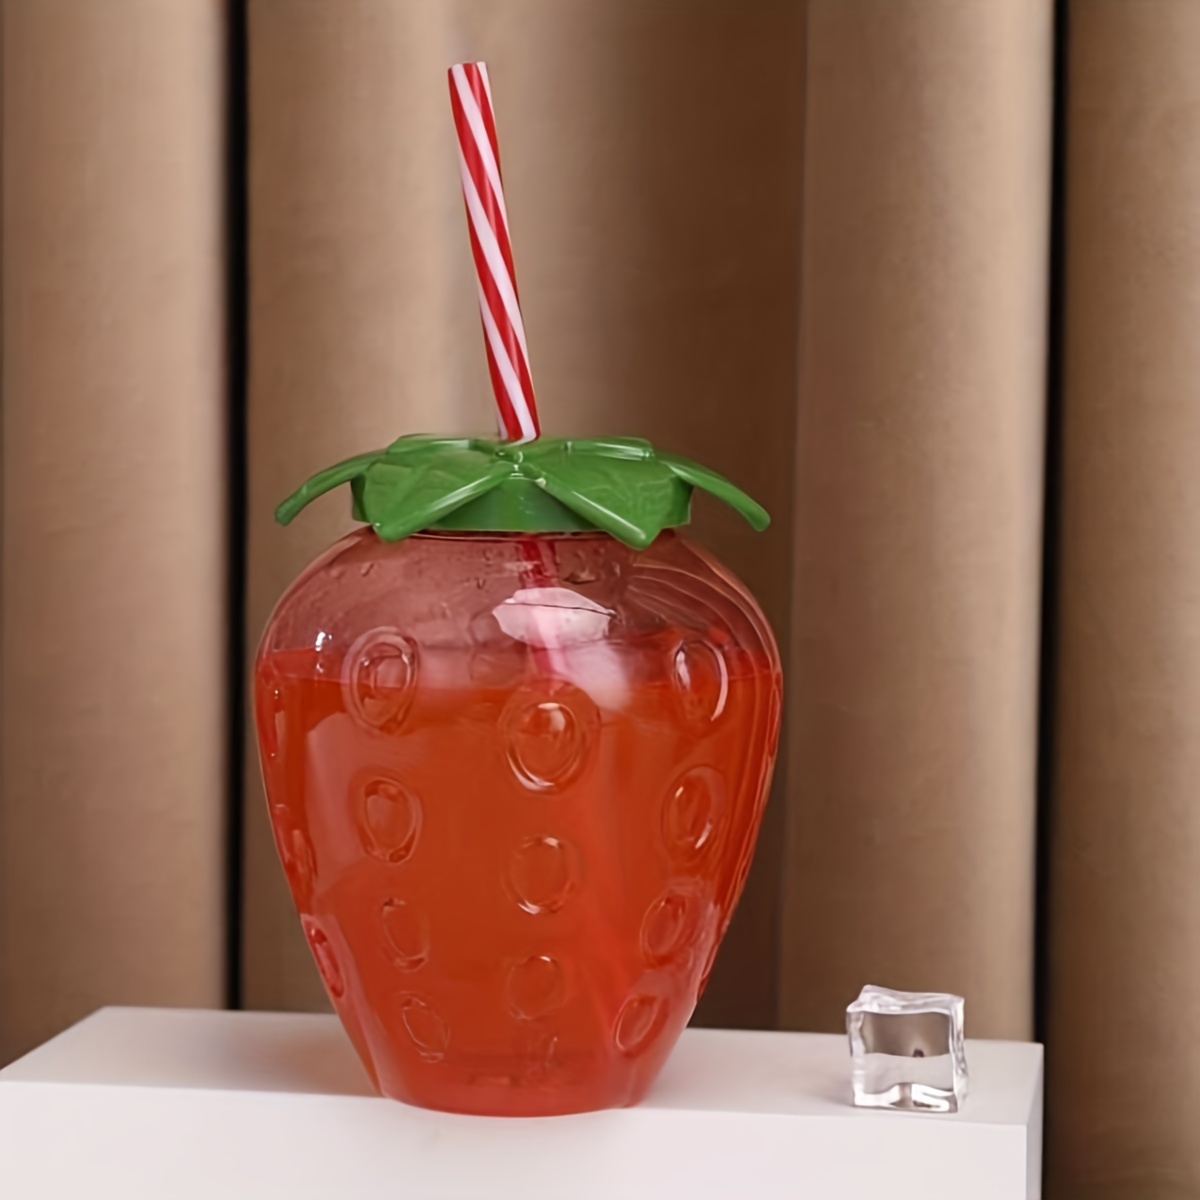 Strawberry Heart Straw Toppers set of 4 for Tumbler, Straw Cup